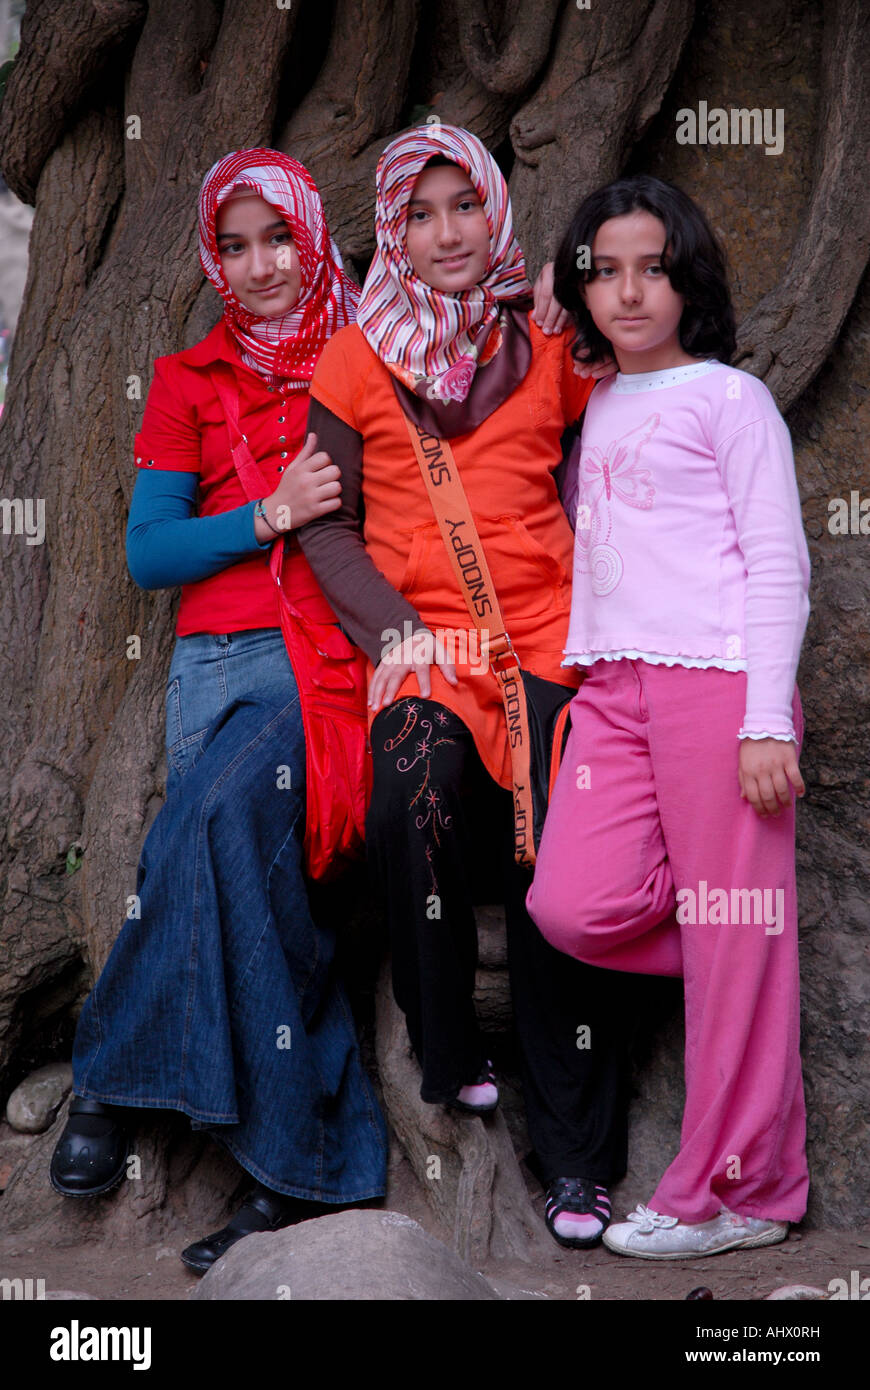 THREE YOUNG TURKISH MUSLIM GIRL LEANING ON THE TREE,TWO WITH HIJAB ...